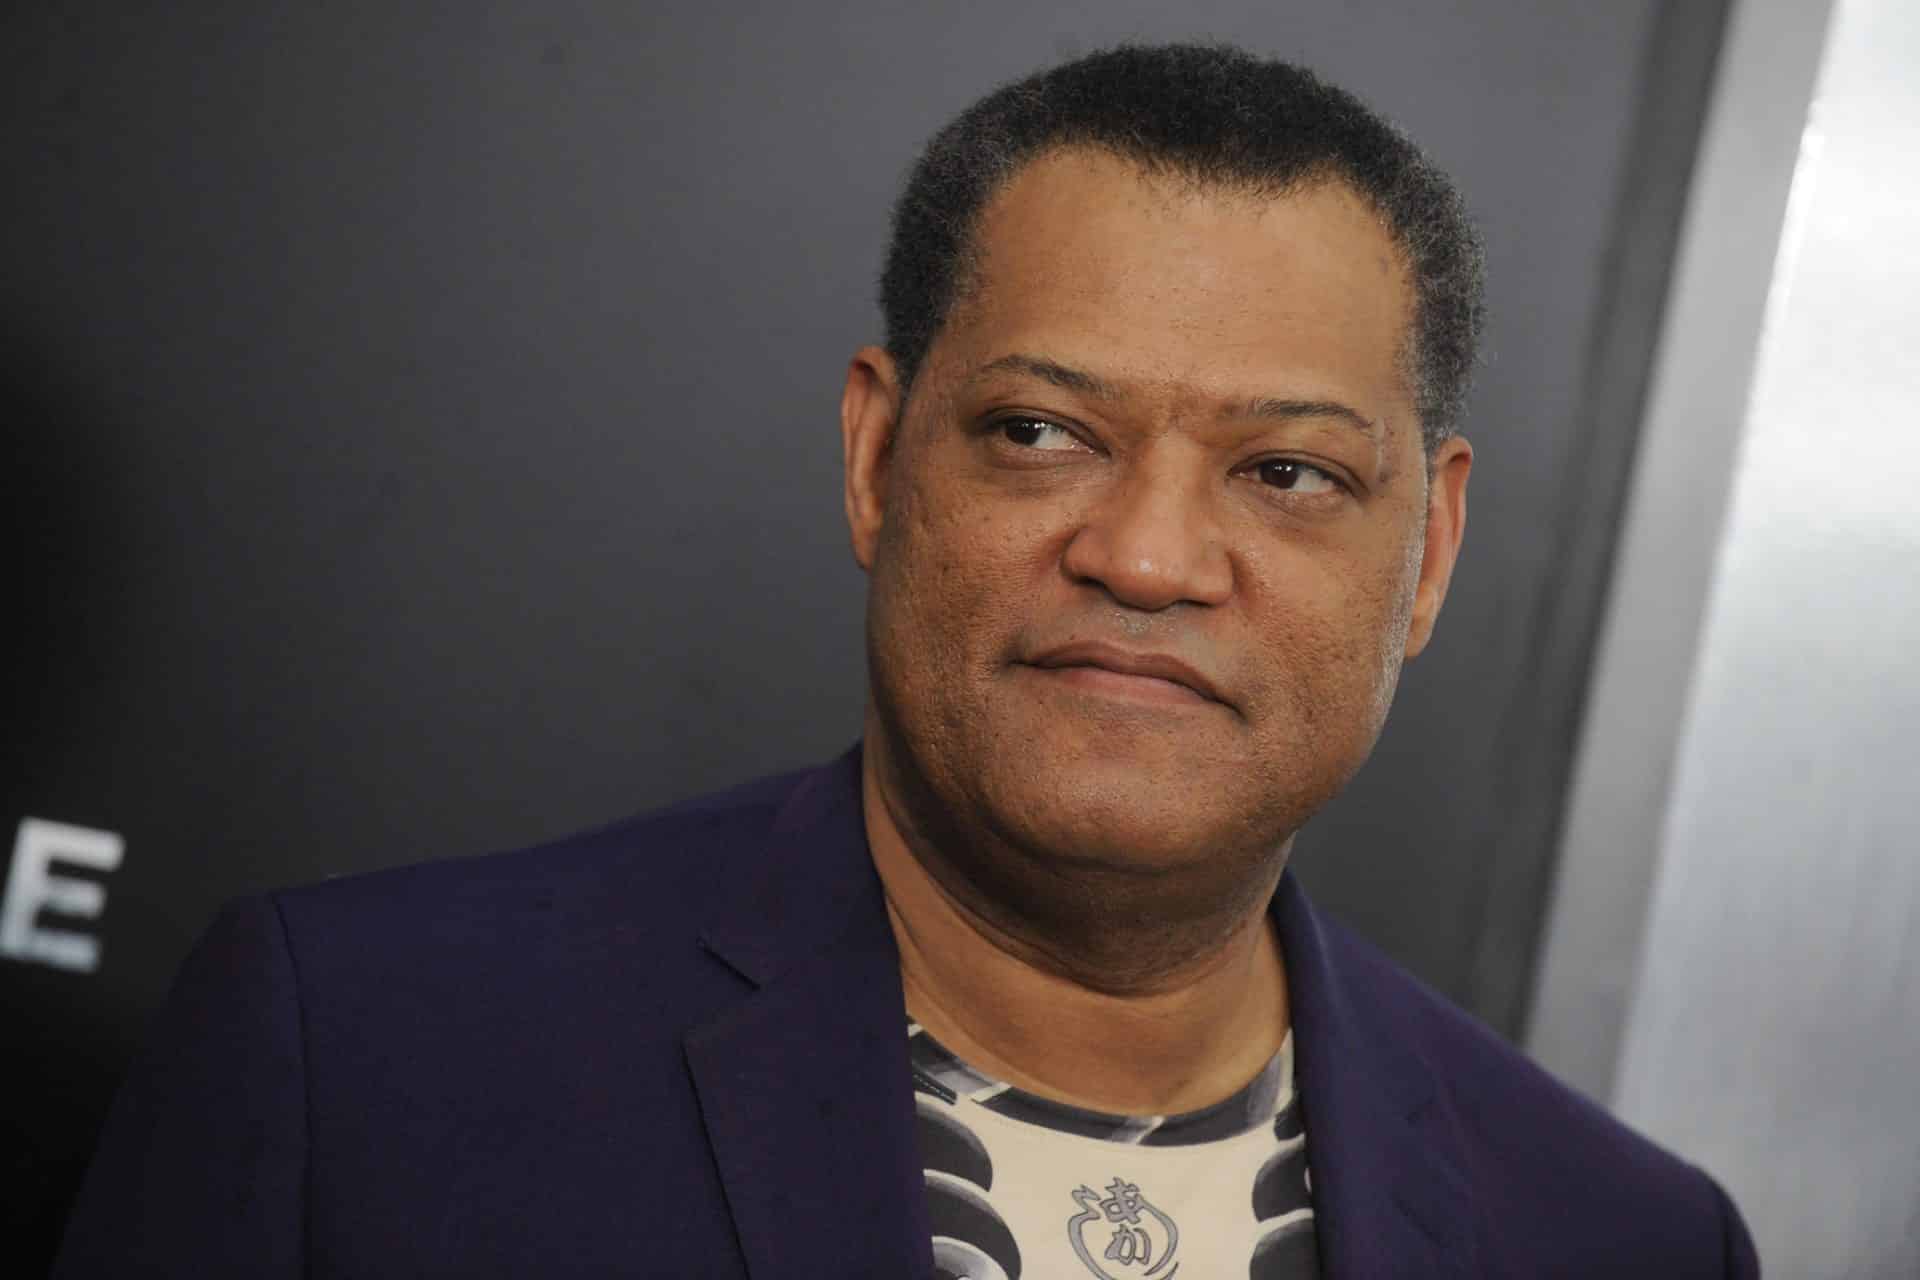 Laurence Fishburne parla del suo ruolo in Ant-Man and The Wasp